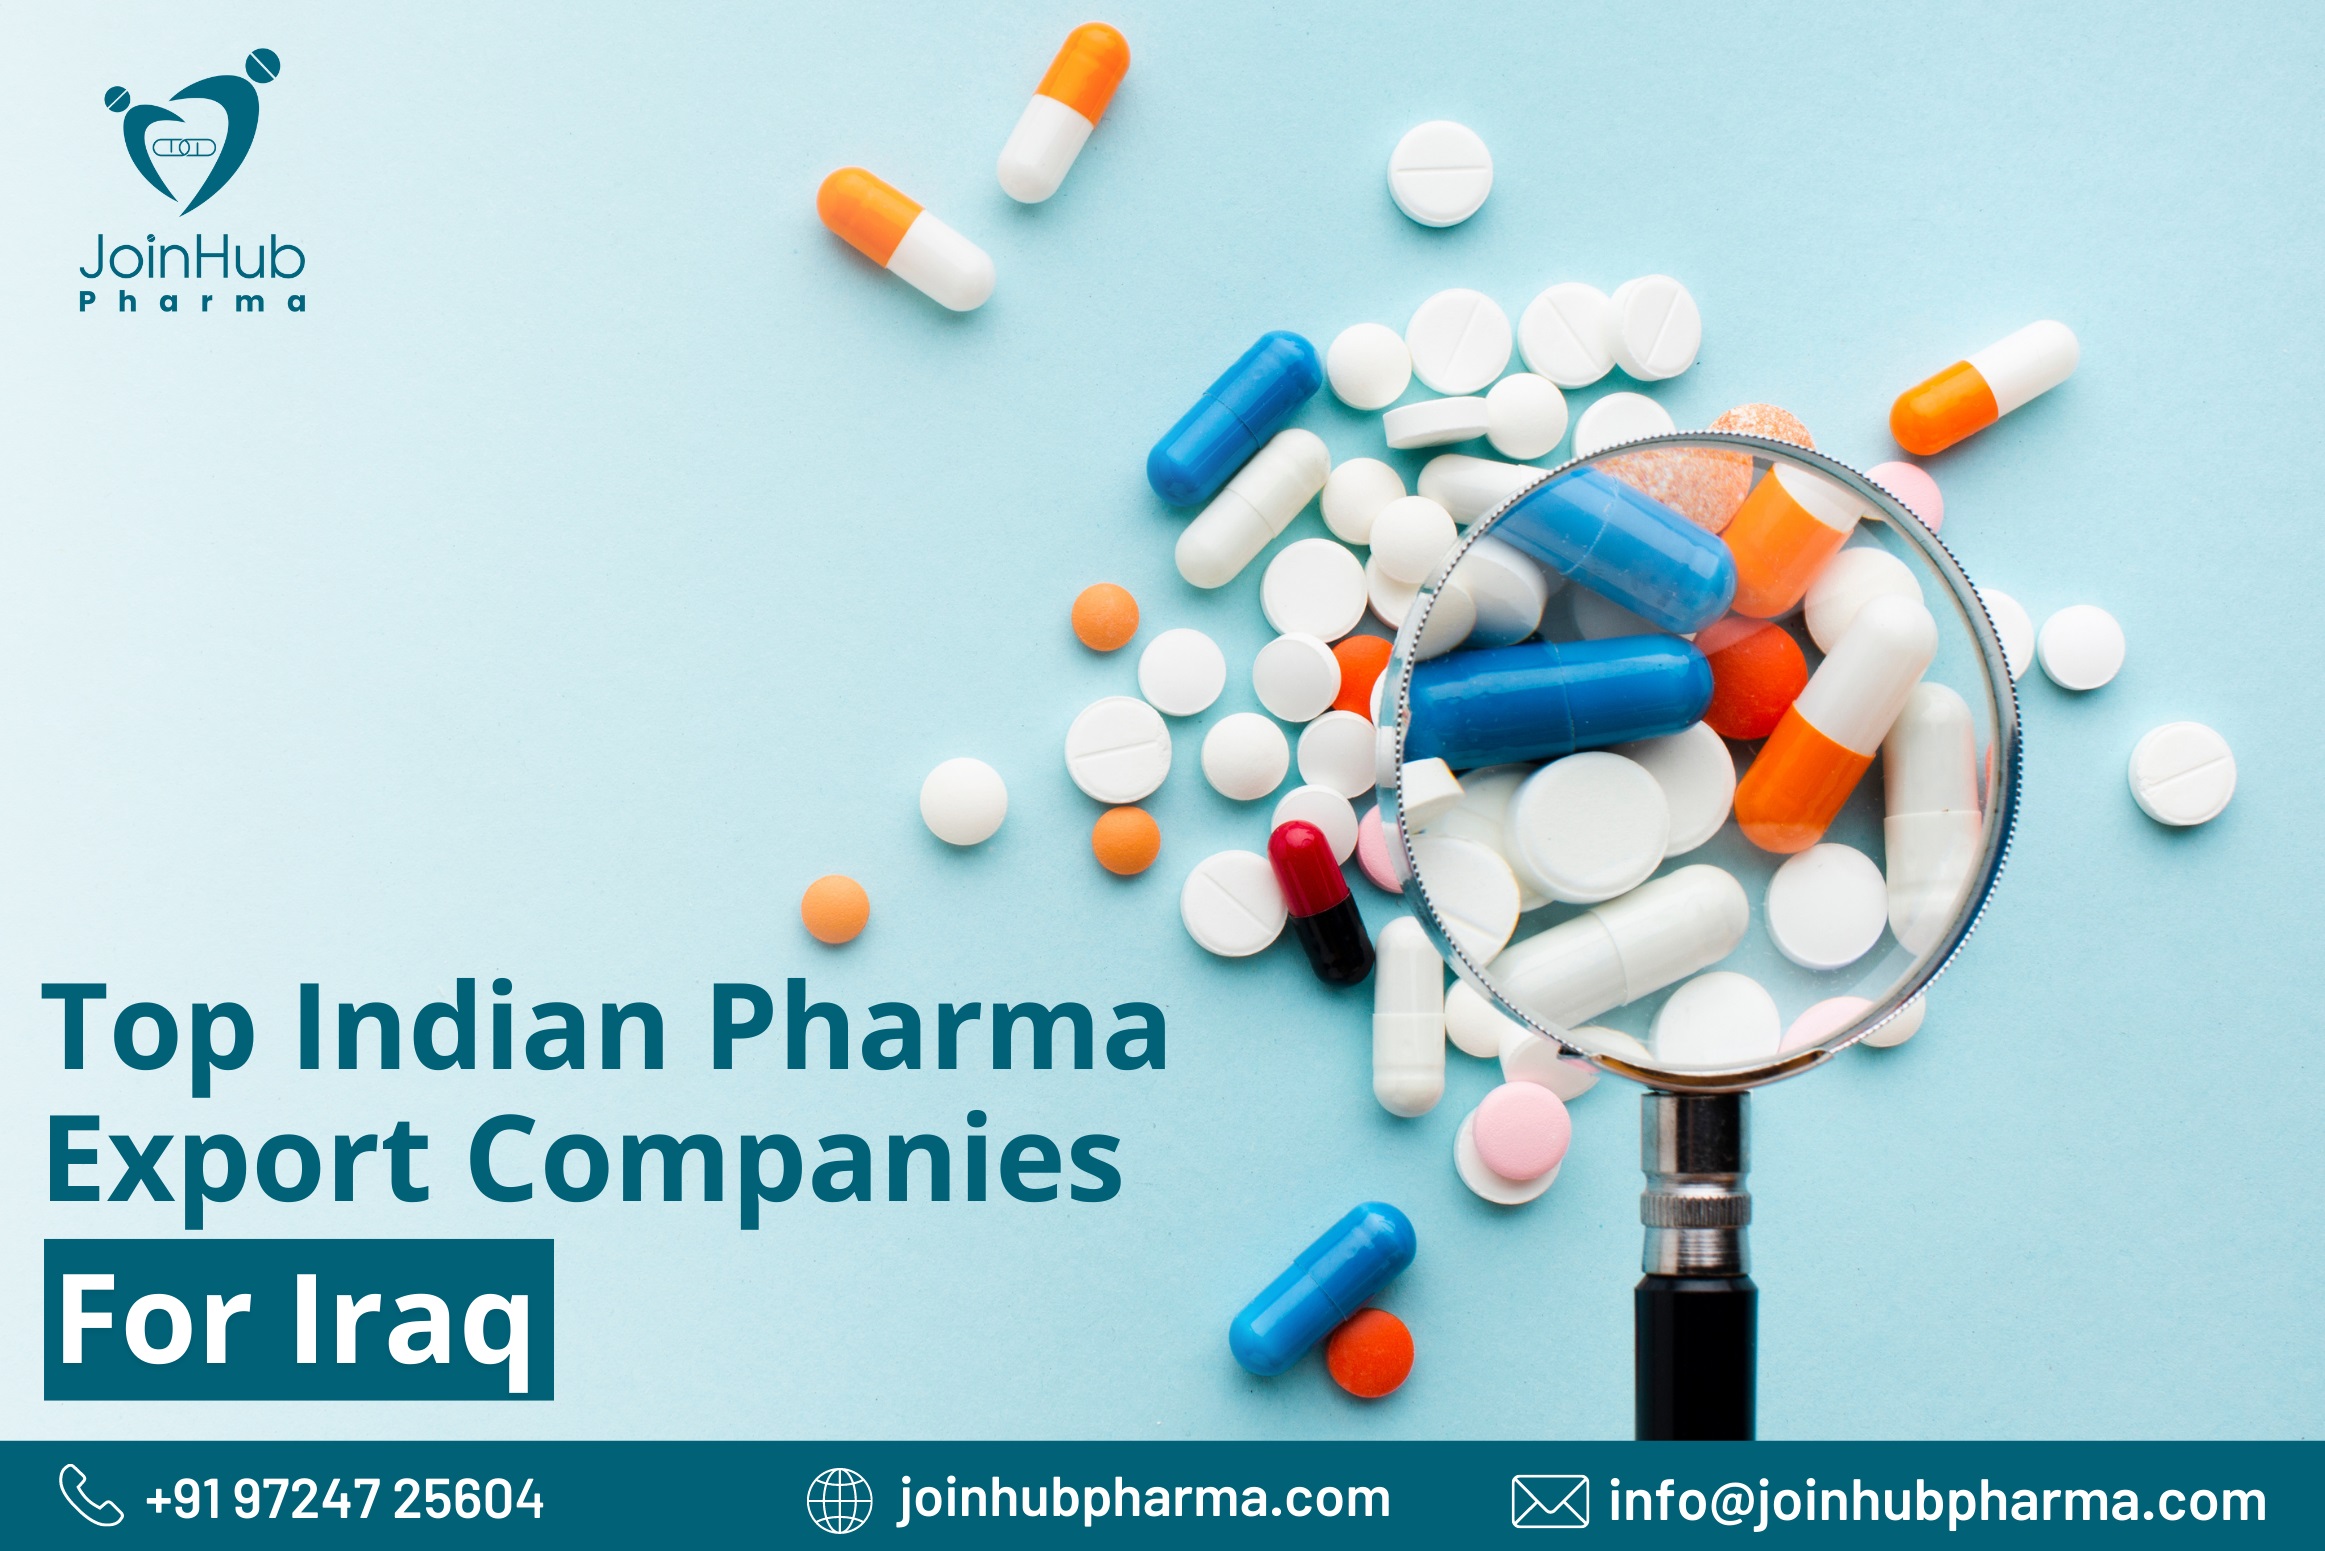 Top Indian pharma export companies for Iraq